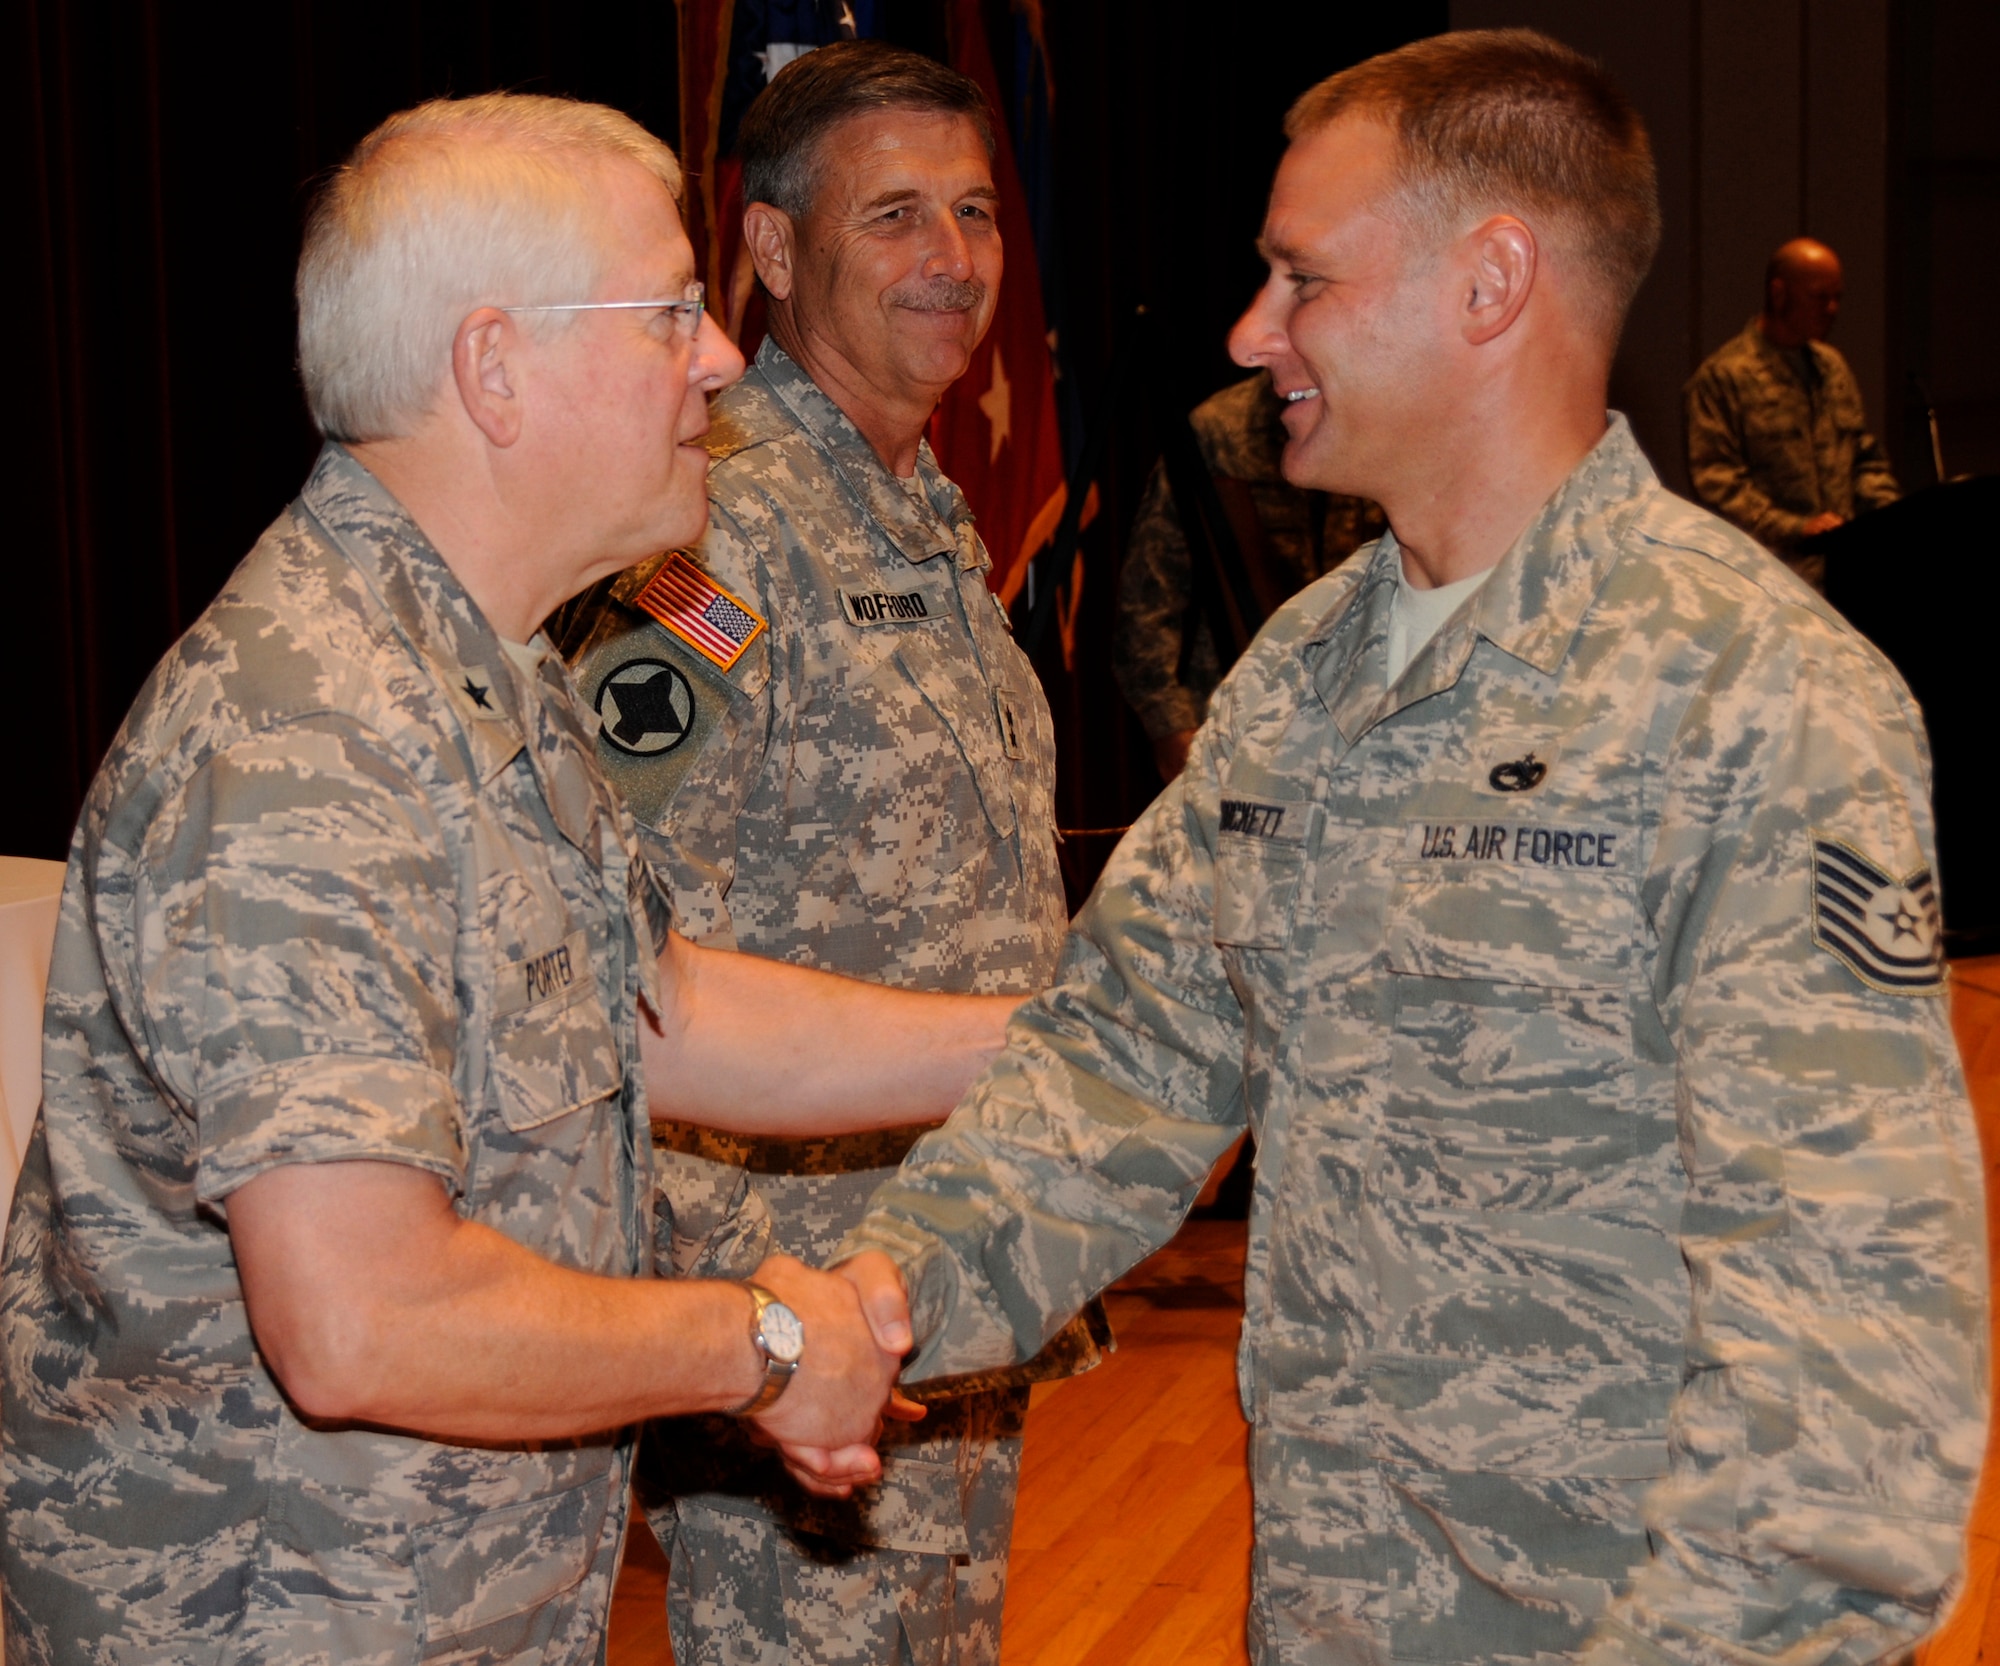 An Airman with the 188th Fighter Wing shakes hands with Brig. Gen. Riley Porter, commander of the Arkansas Air National Guard, during a Hometown Heroes Salute program held at the Fort Smith (Ark.) Convention Center June 26, 2010. More than 300 Airmen with the Arkansas Air National Guard's 188th along with their respective families were honored for their sacrifices during the event. The purpose was to honor 188th Airmen for service in support of Operation Enduring Freedom and Operation Iraqi Freedom from Sept. 11, 2001 through Dec. 31, 2008.  (U.S. Air Force photo by Tech Sgt. Stephen Hornsey/188th Fighter Wing Public Affairs)
